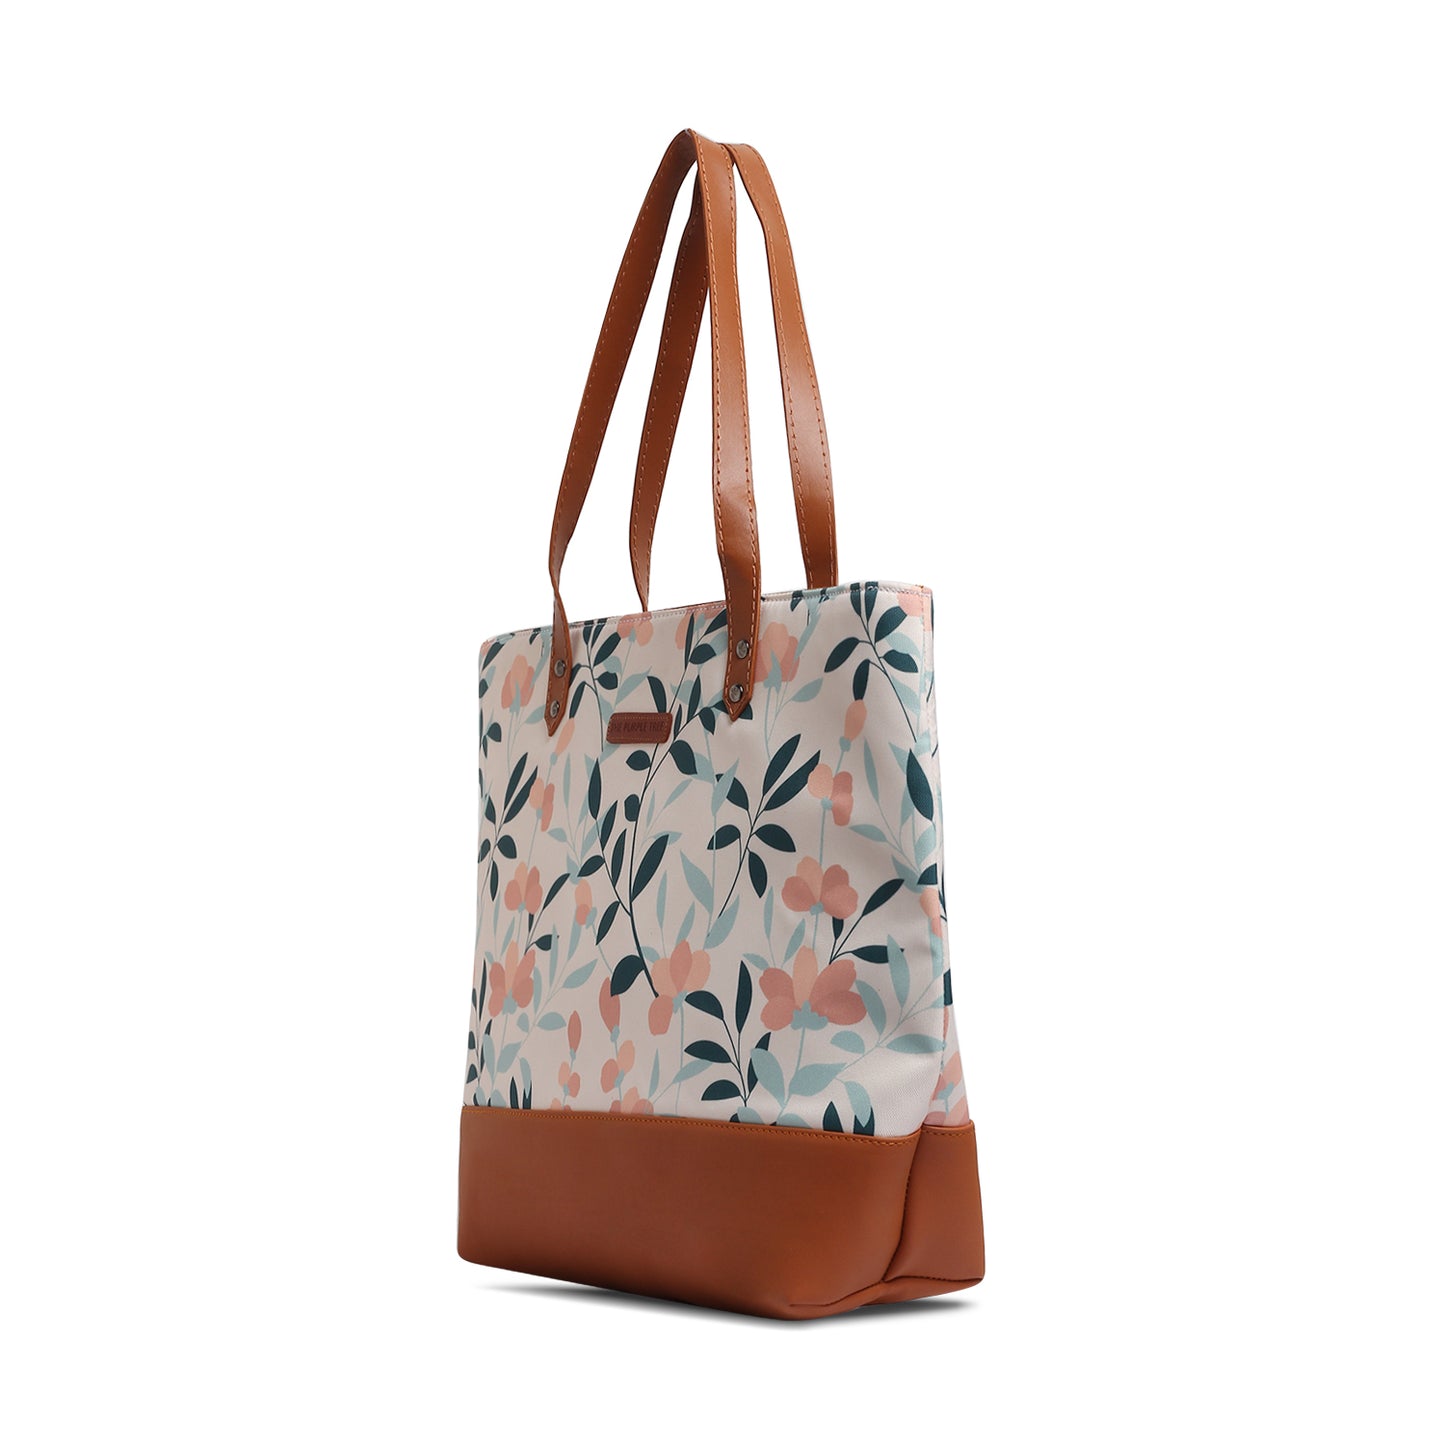 Cute tote bag adorned with floral pattern and leather strap